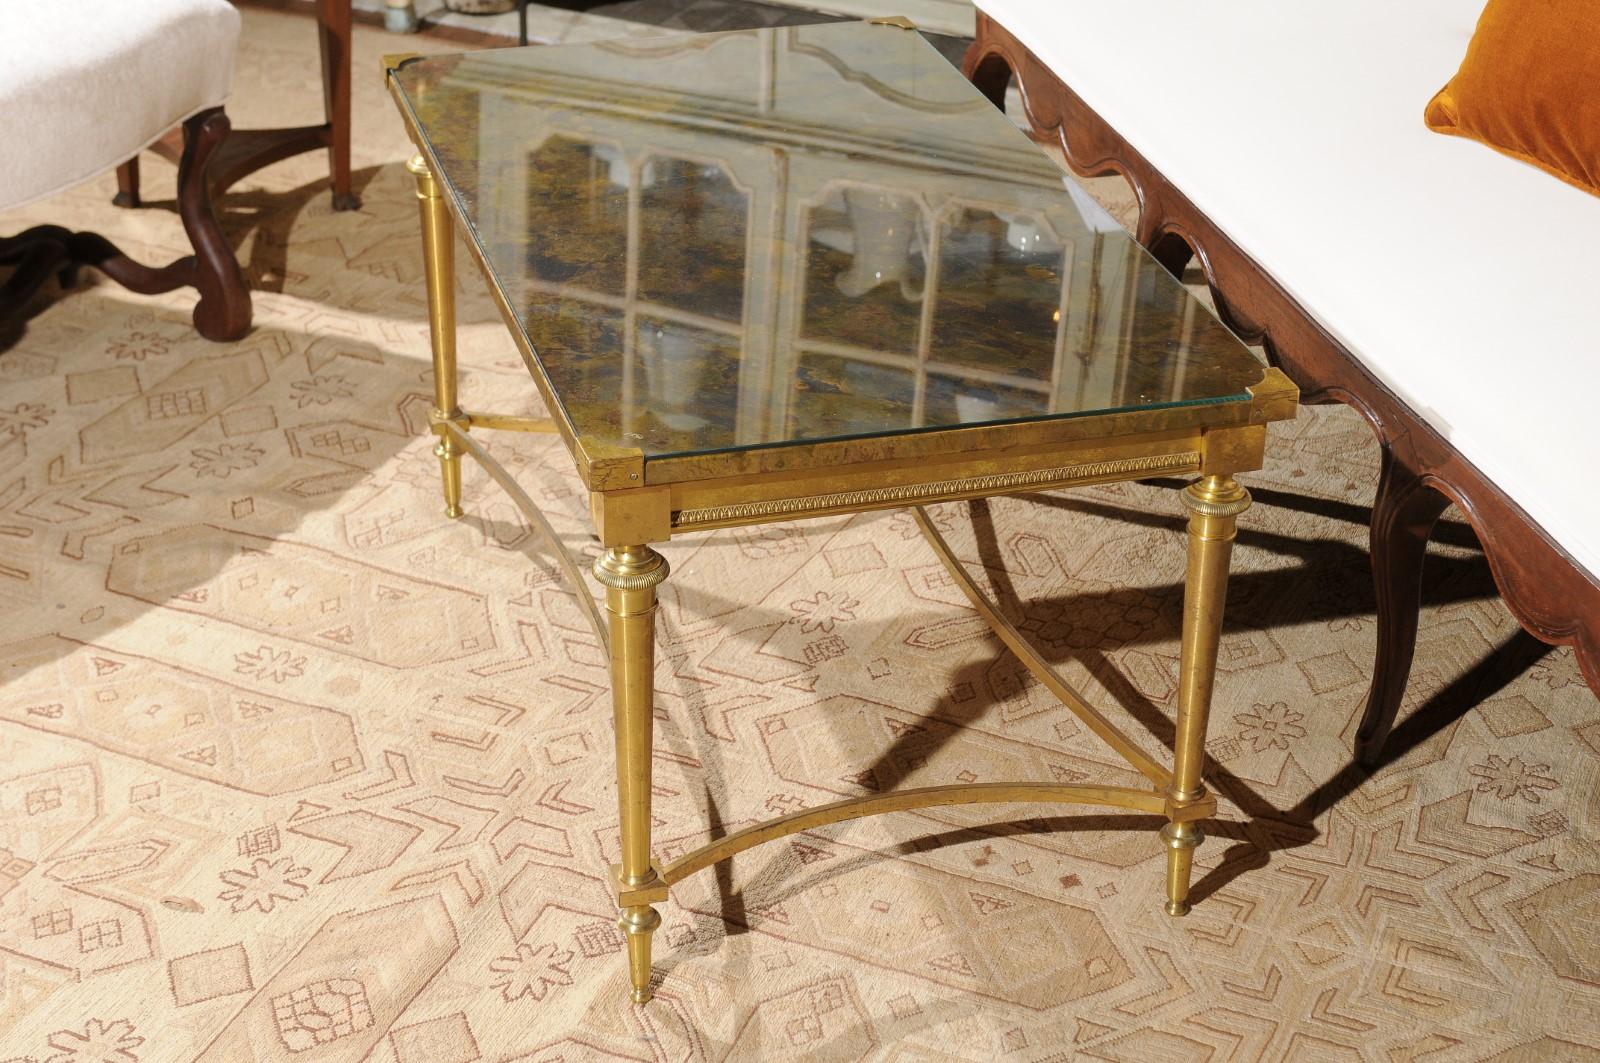 A French Maison Baguès brass coffee table from the mid-20th century, with glass and marbleized top. Born in France during the midcentury period, this Maison Baguès coffee table features an exquisite rectangular marbleized top protected under custom